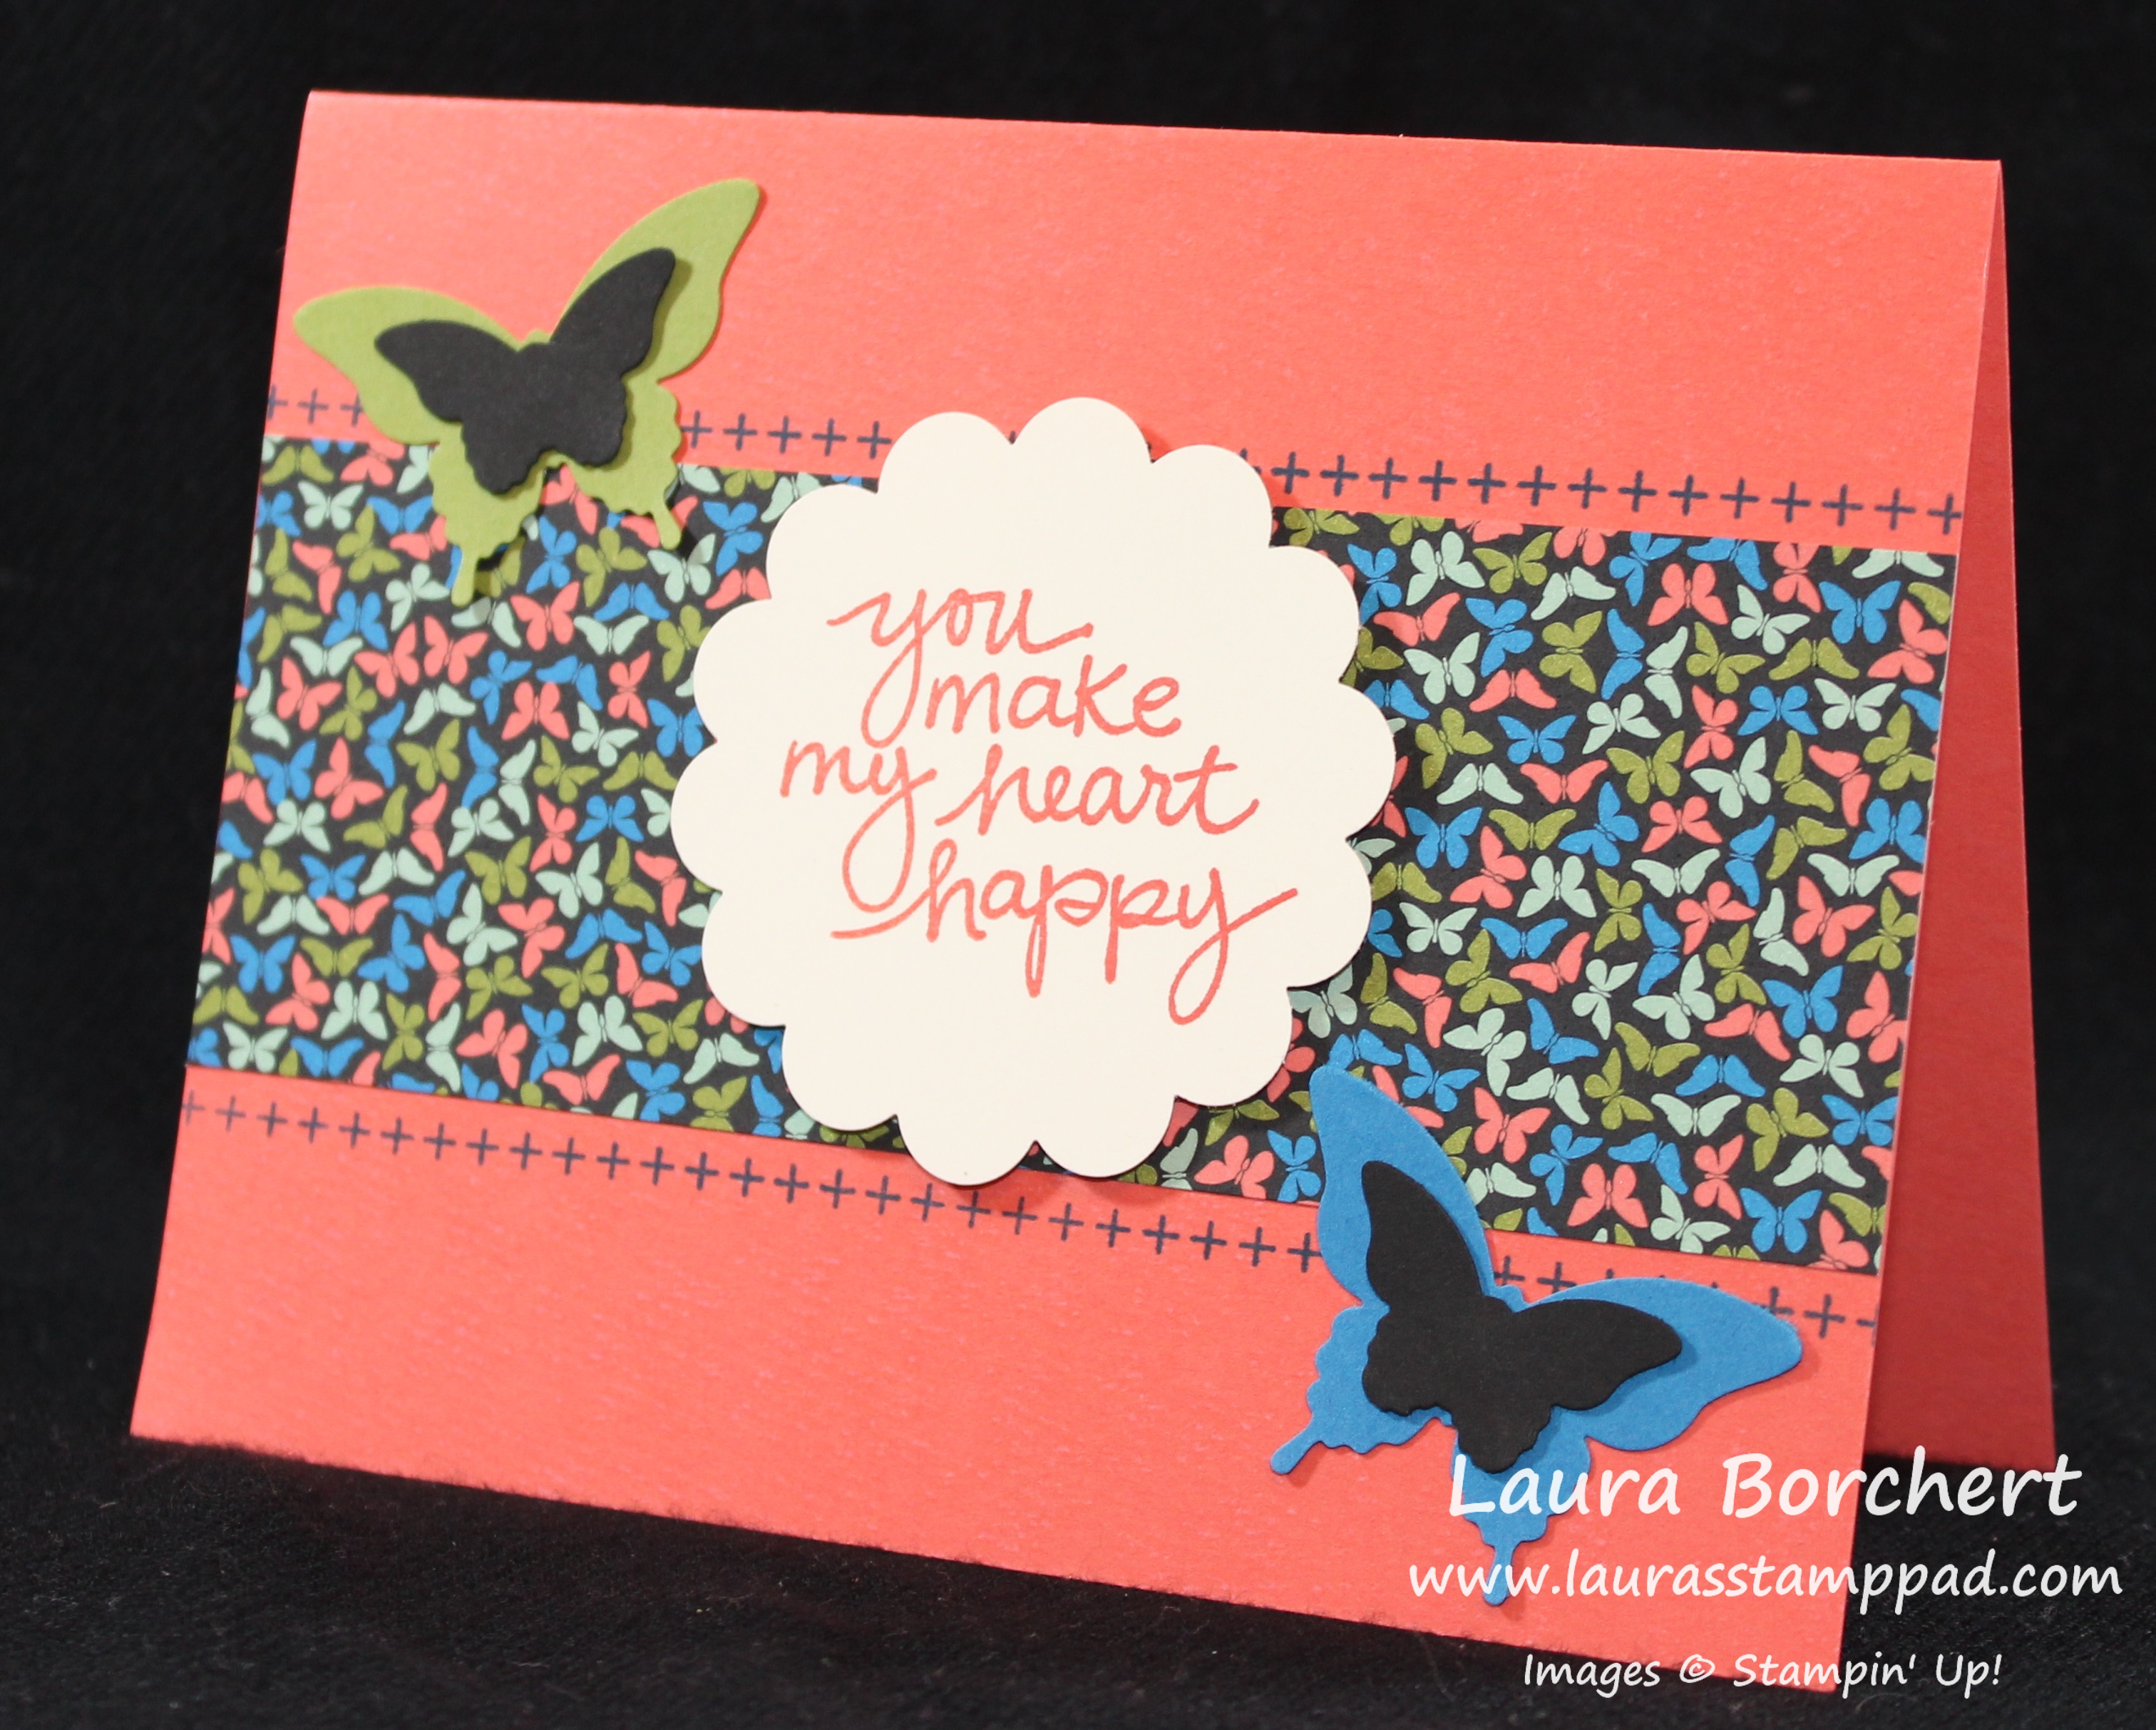 How to Make a Beautiful Paper Butterfly - Little Passports